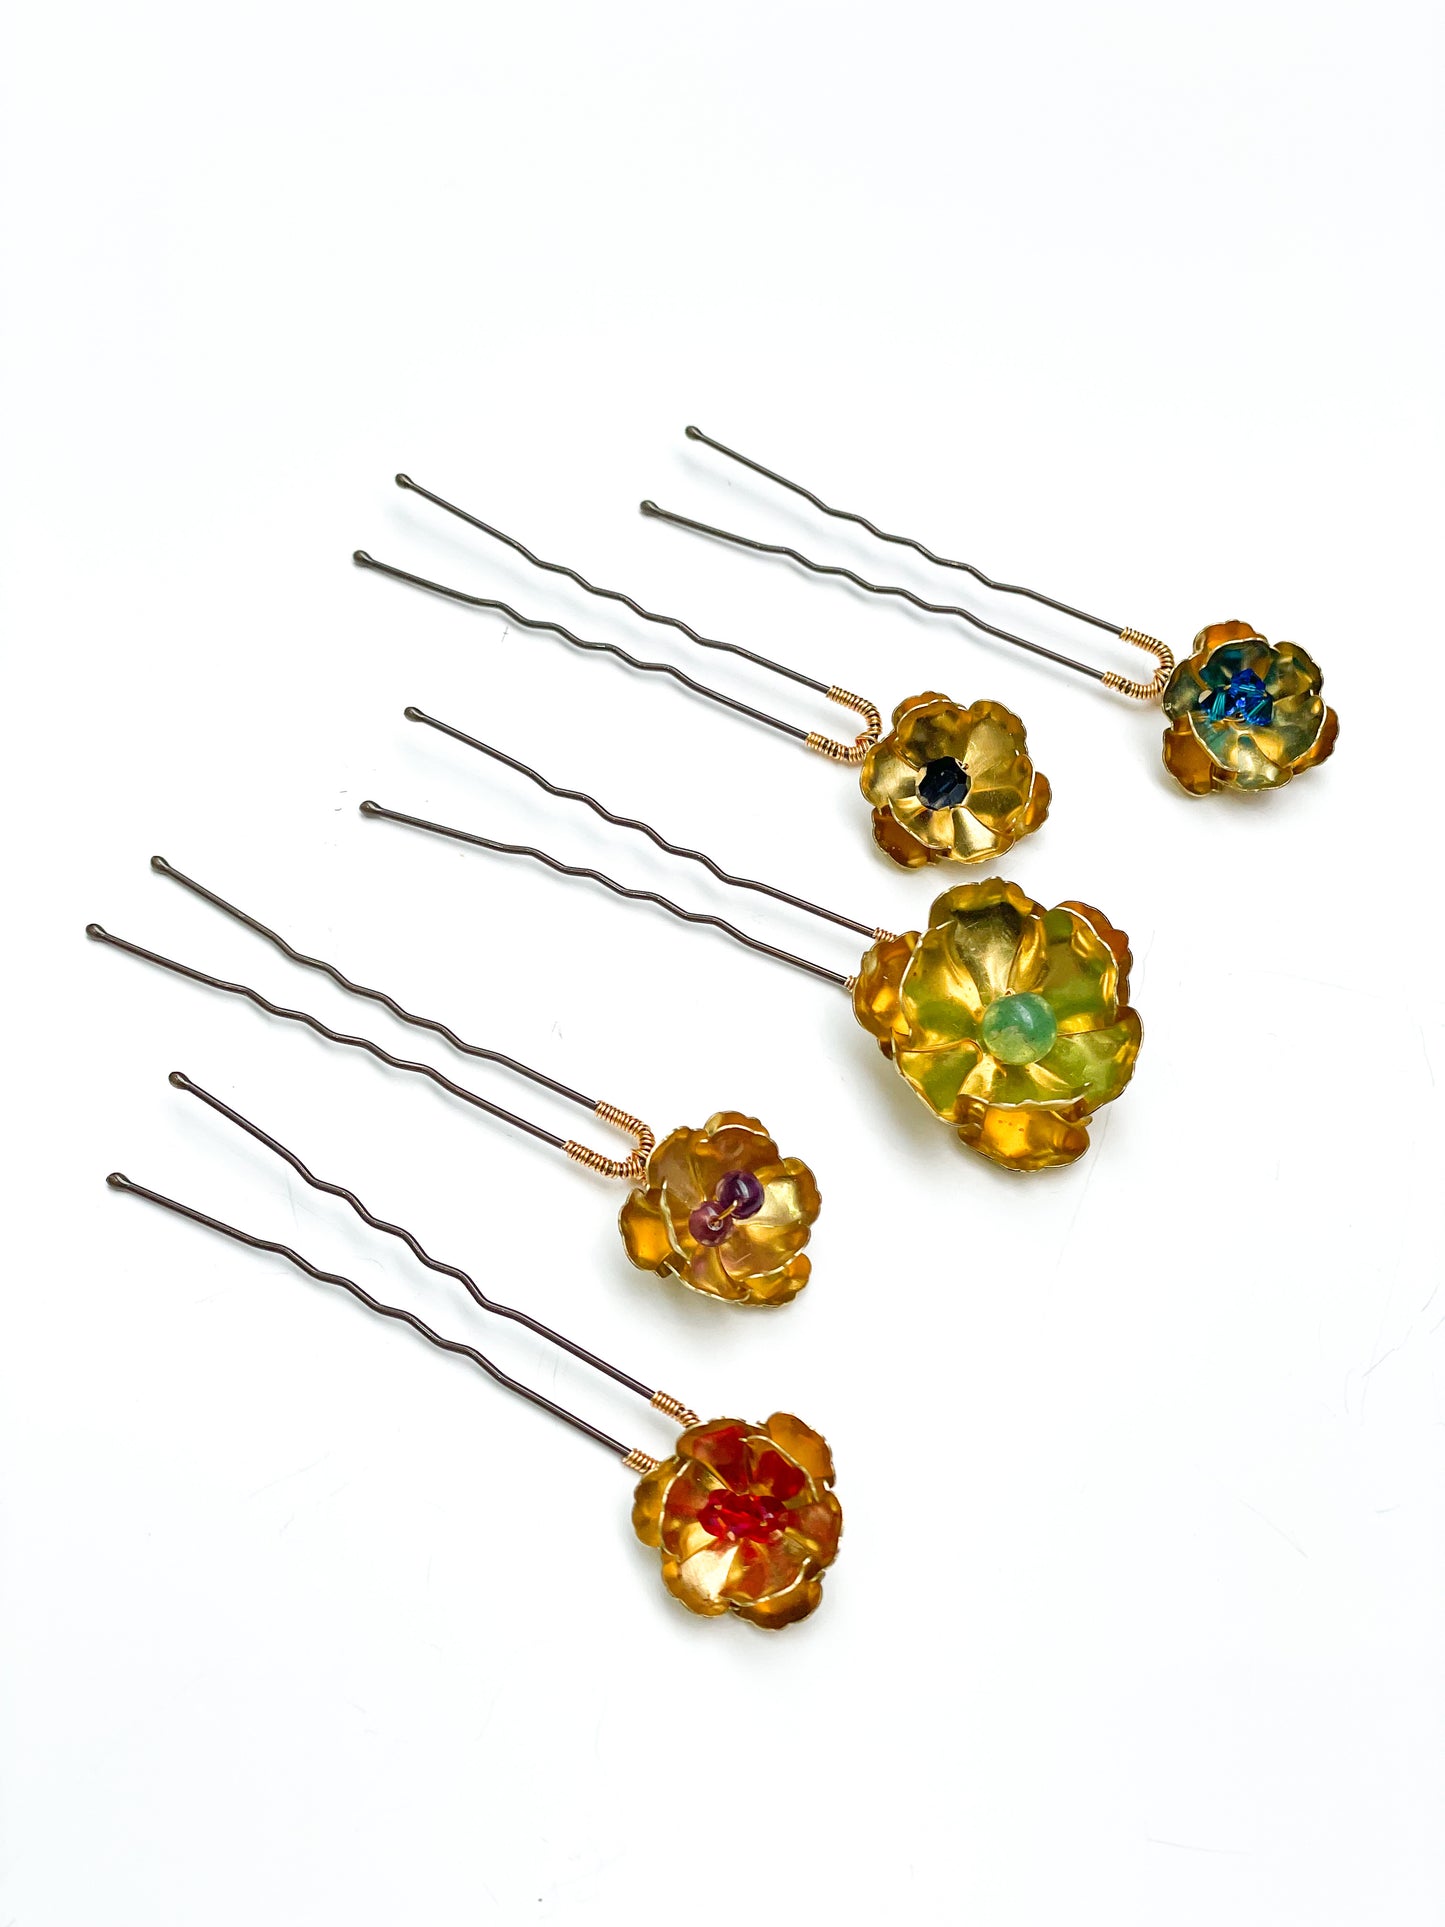 Bloom Scatter pins